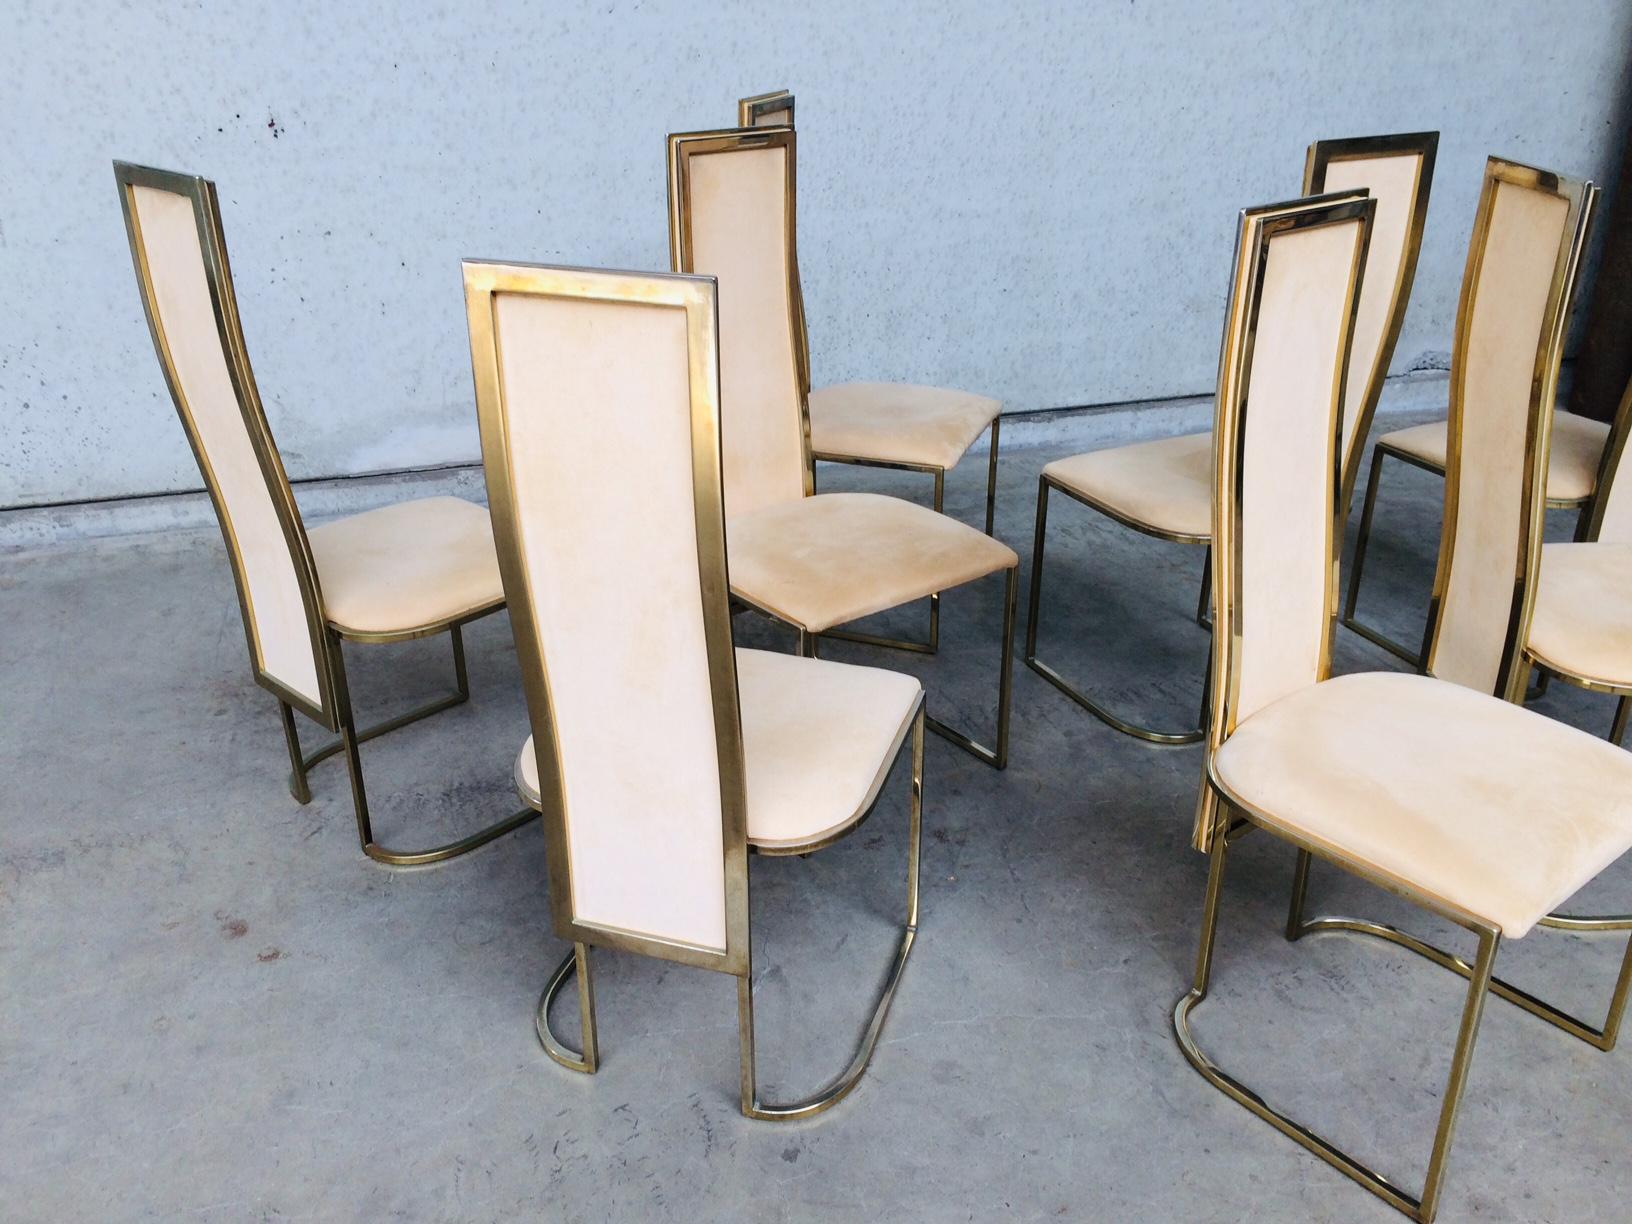 Late 20th Century Hollywood Regency Design Set of 8 Dining Chairs by Belgo Chrom, 1970's For Sale